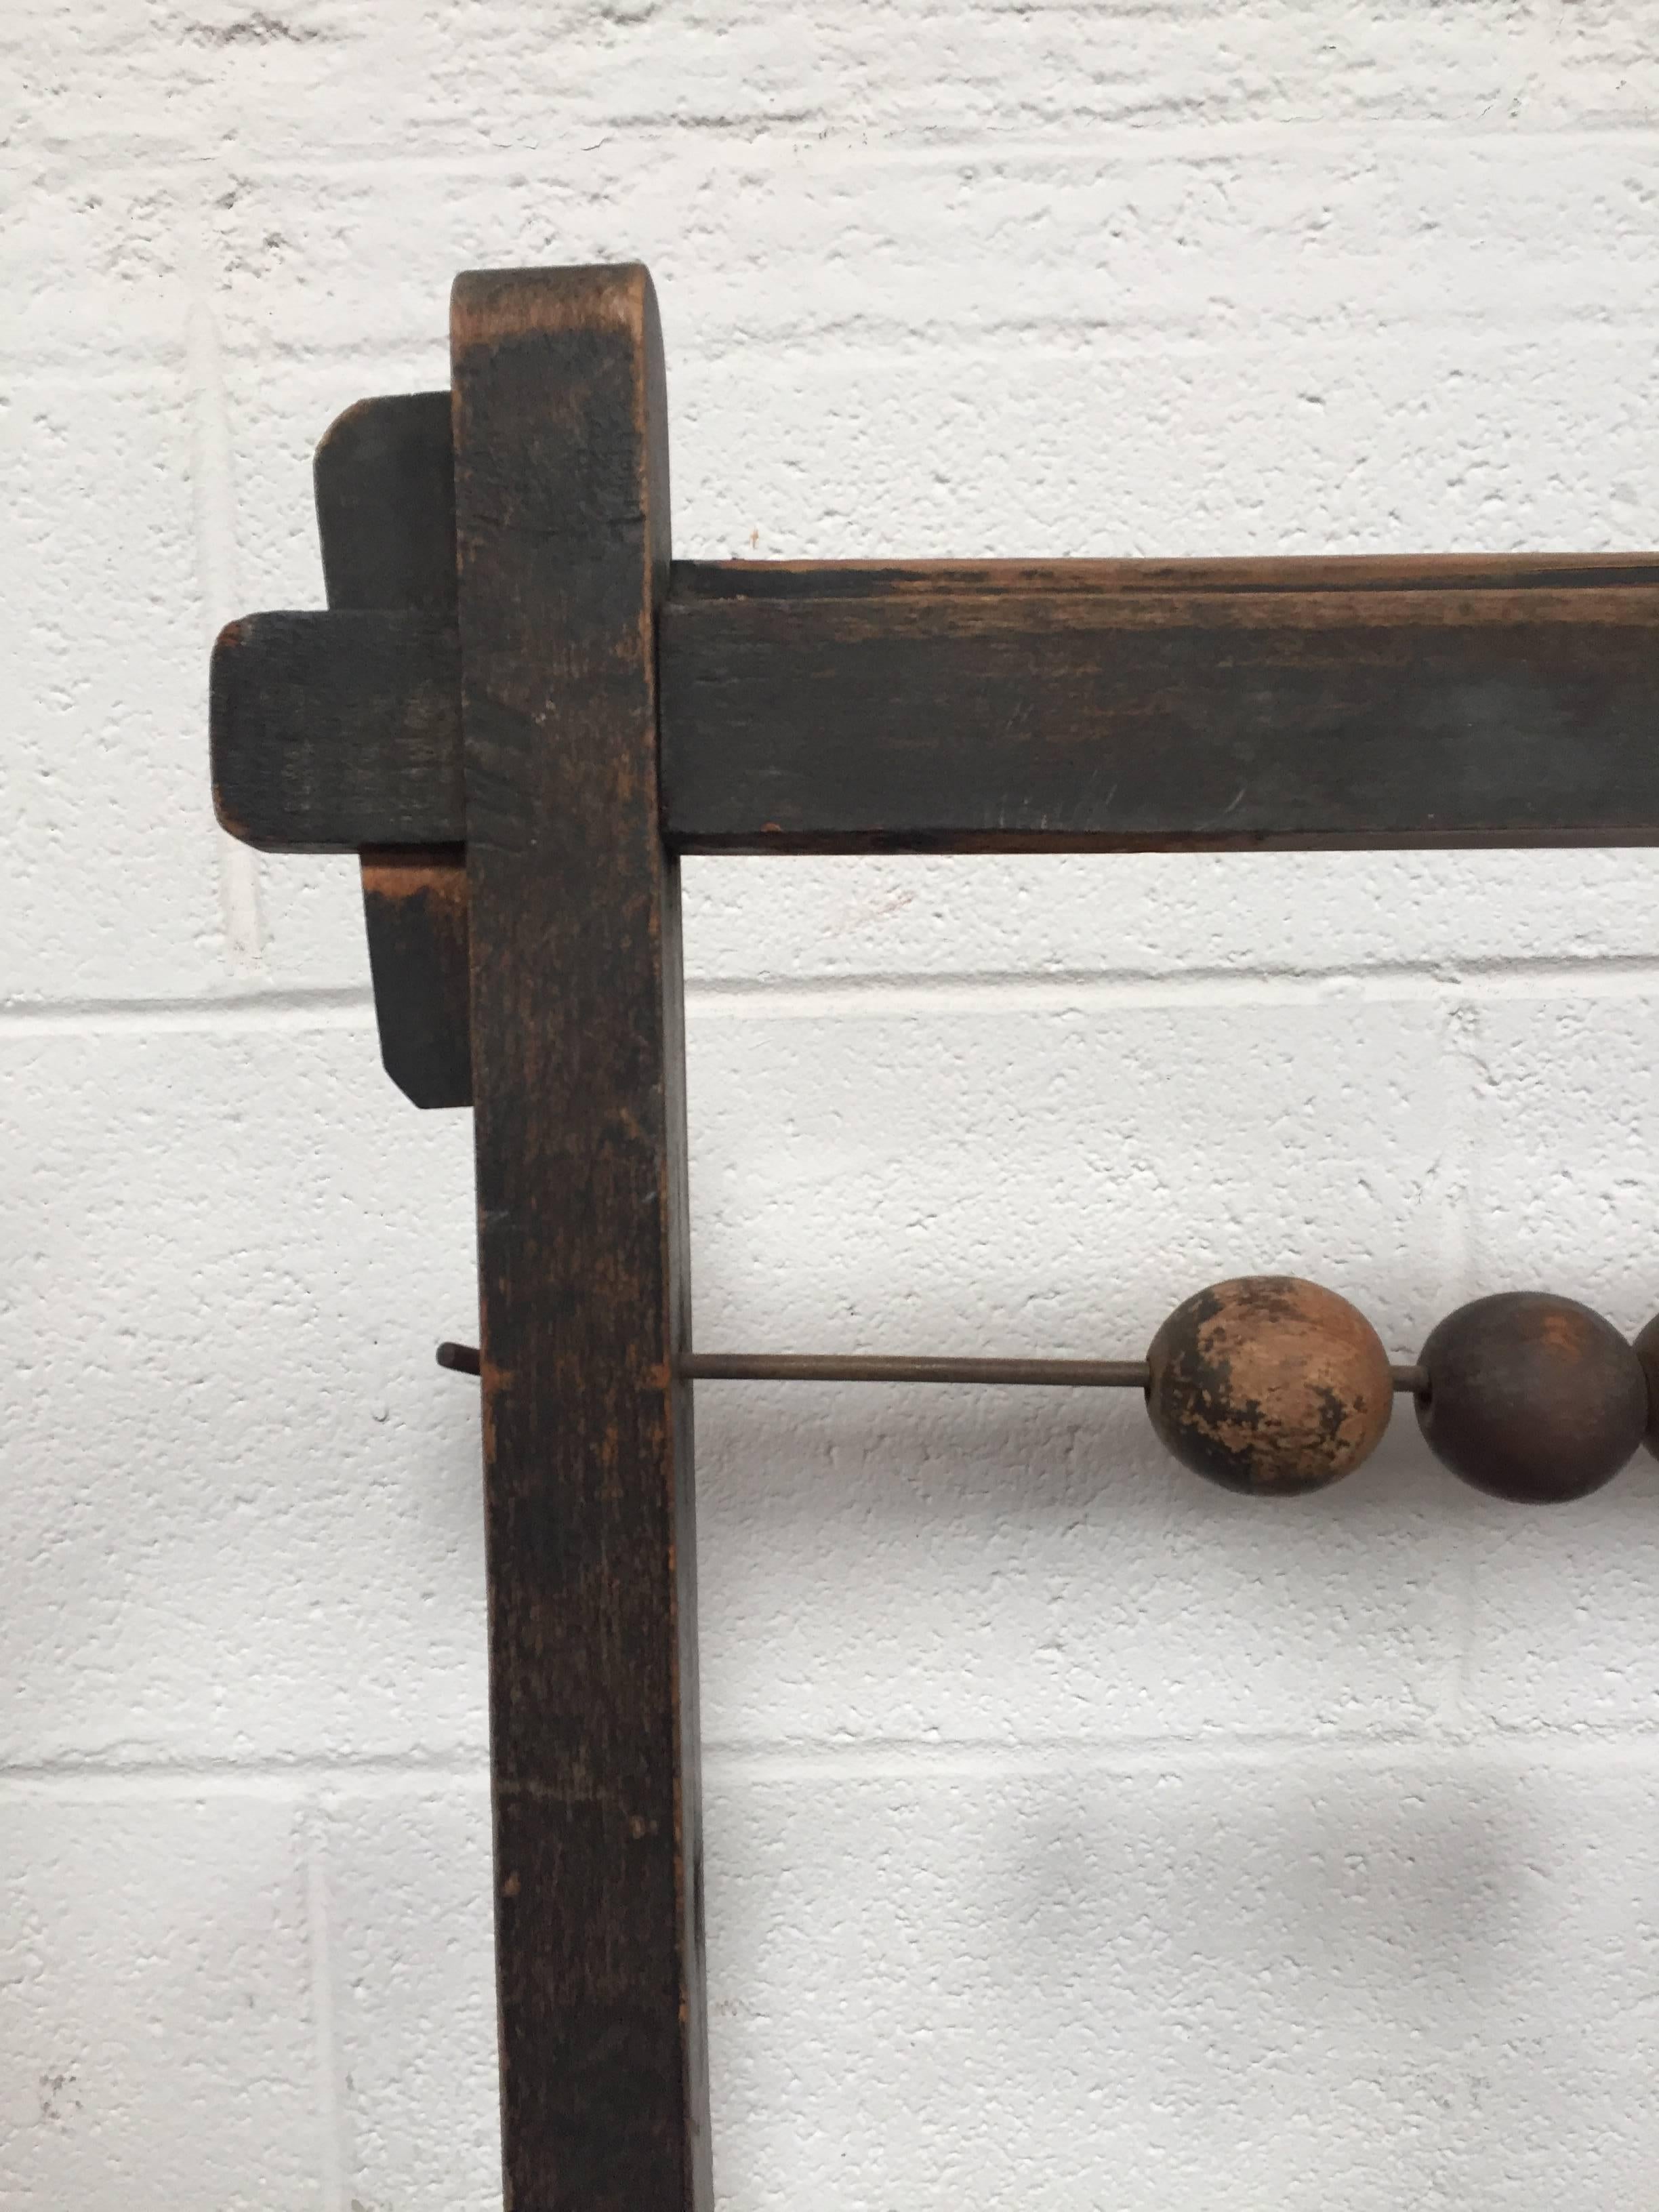 Working Abacus with wooden counting balls from early 20th century, some of the wires are bent with age, but stands upright and sturdy. 

Wonderful as a set or store display piece.